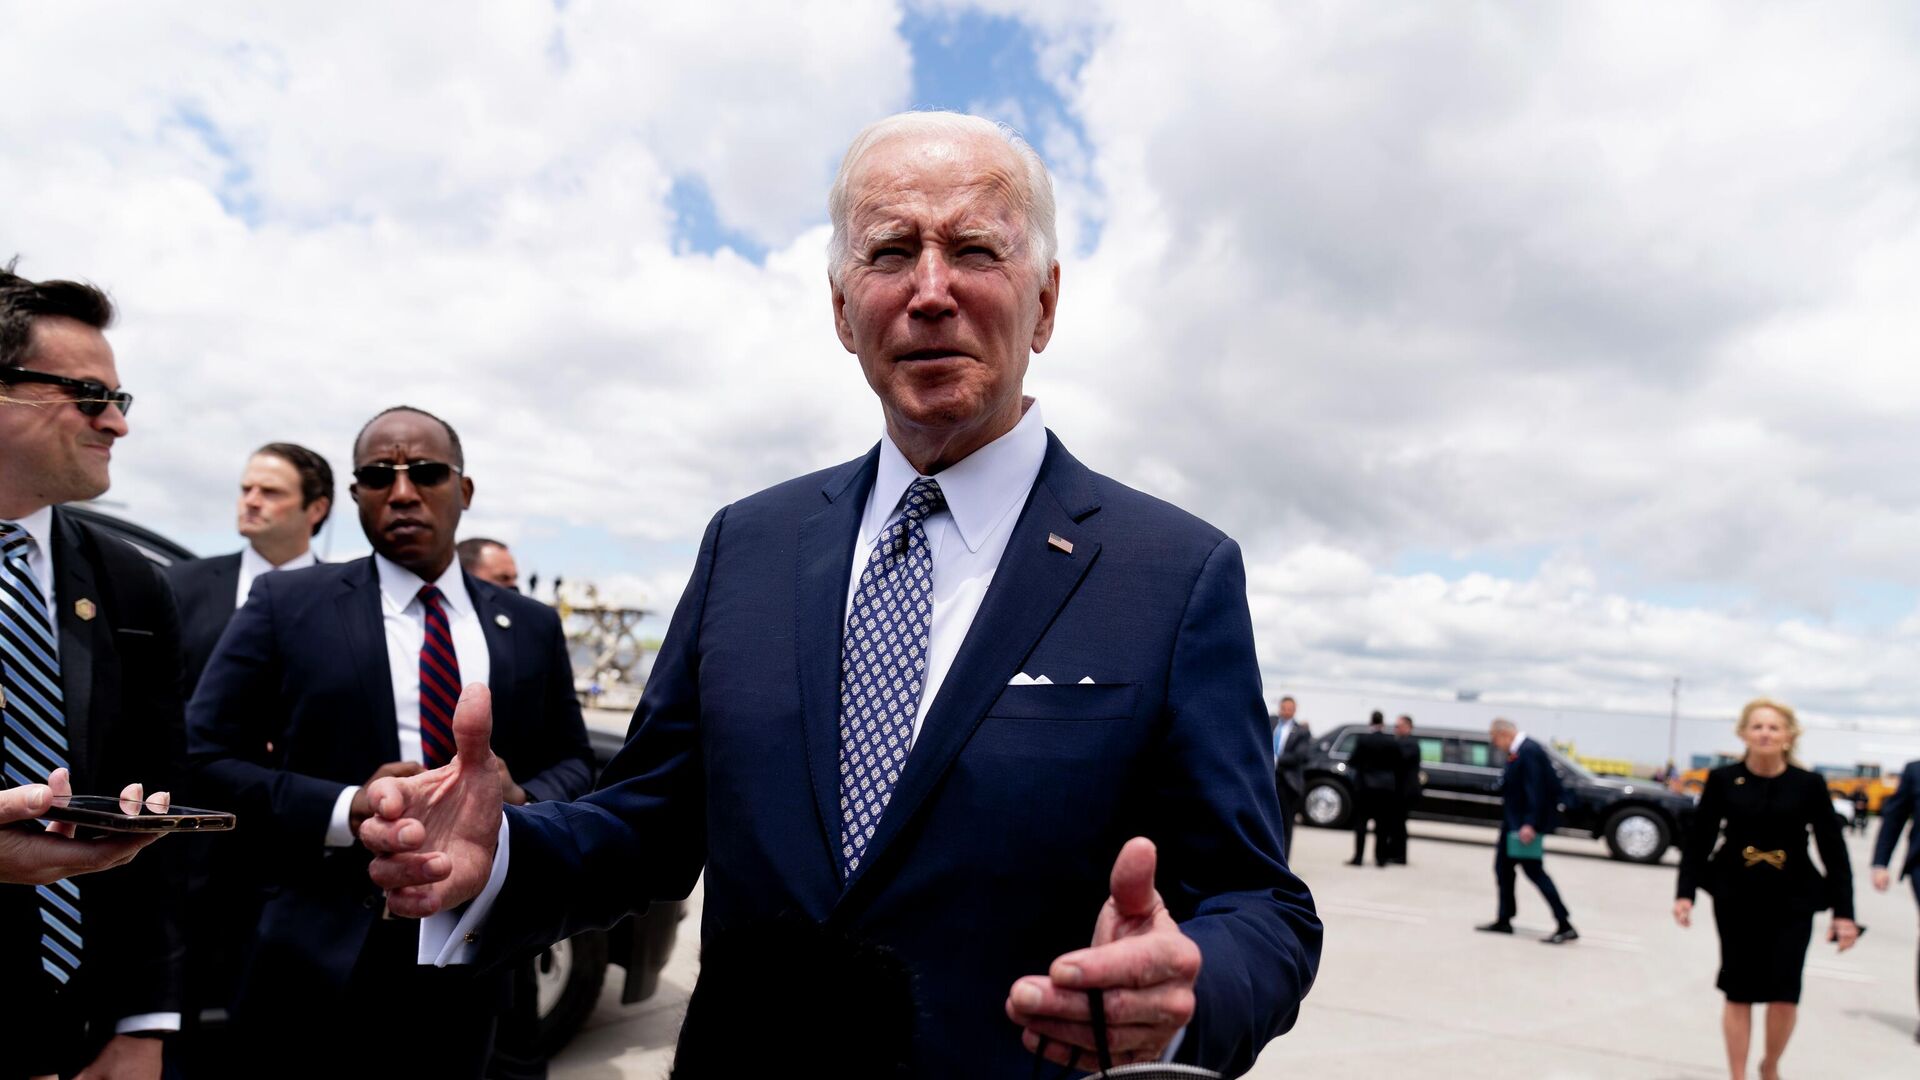 President Joe Biden speaks before boarding Air Force One at Buffalo-Niagara International Airport in Buffalo, N.Y., Tuesday, May 17, 2022, after paying their respects and speak to families of the victims of Saturday's shooting at a supermarket.  - Sputnik International, 1920, 17.05.2022